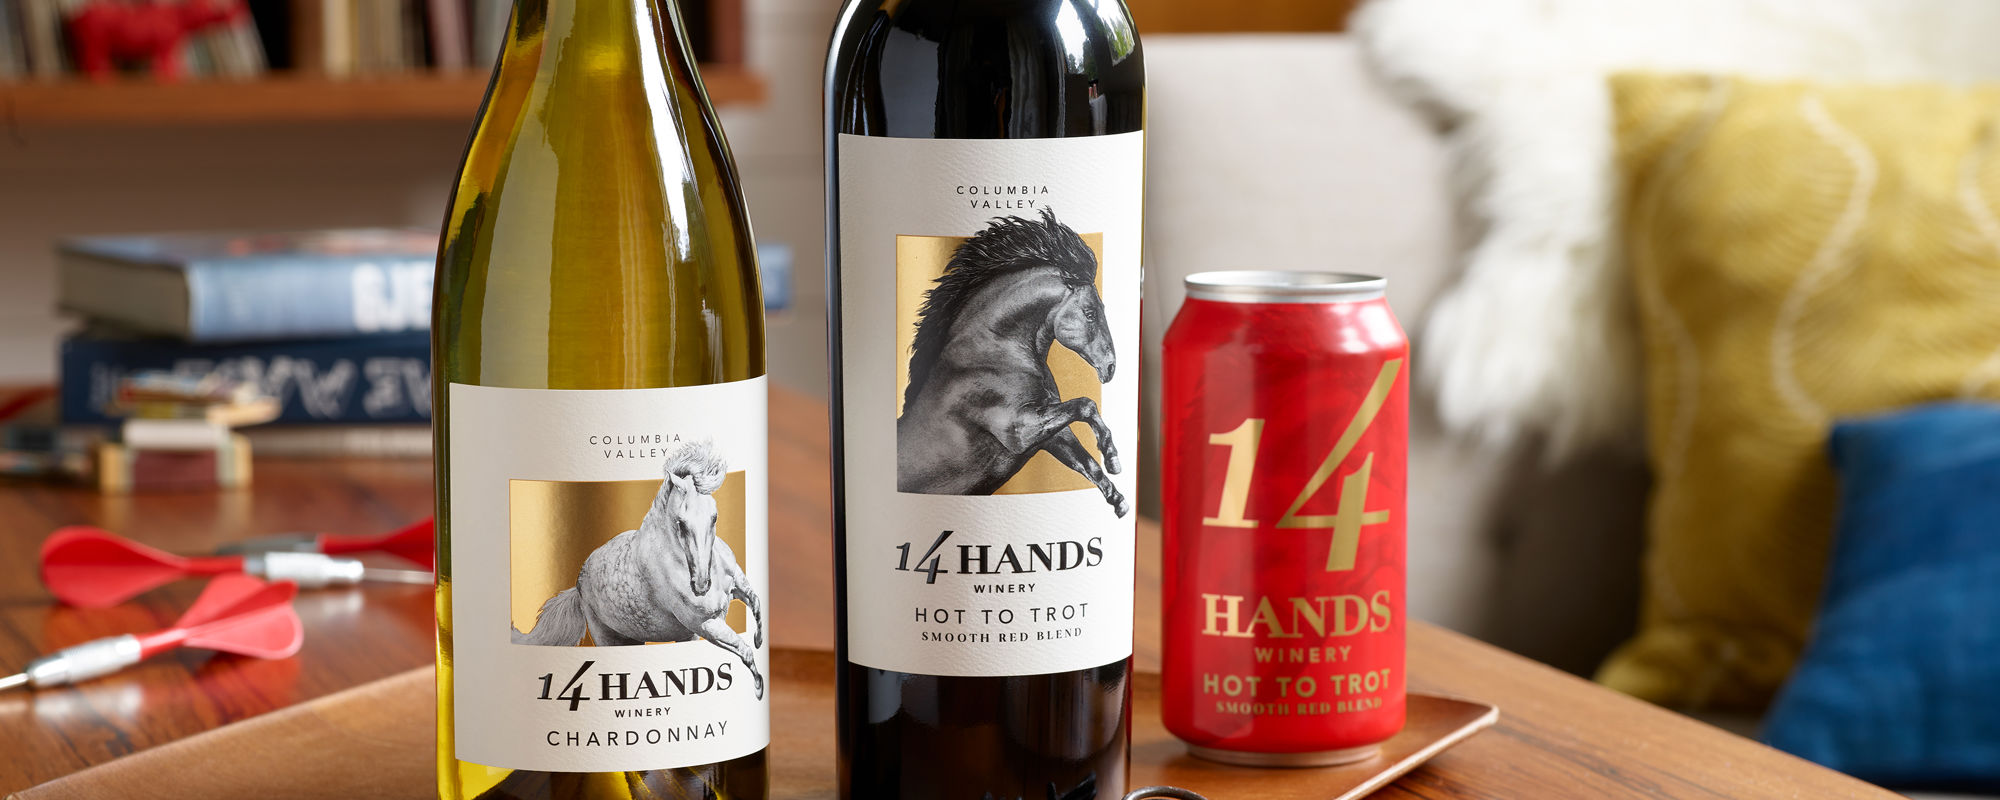 14 Hands essentials wine bottles and can on a table